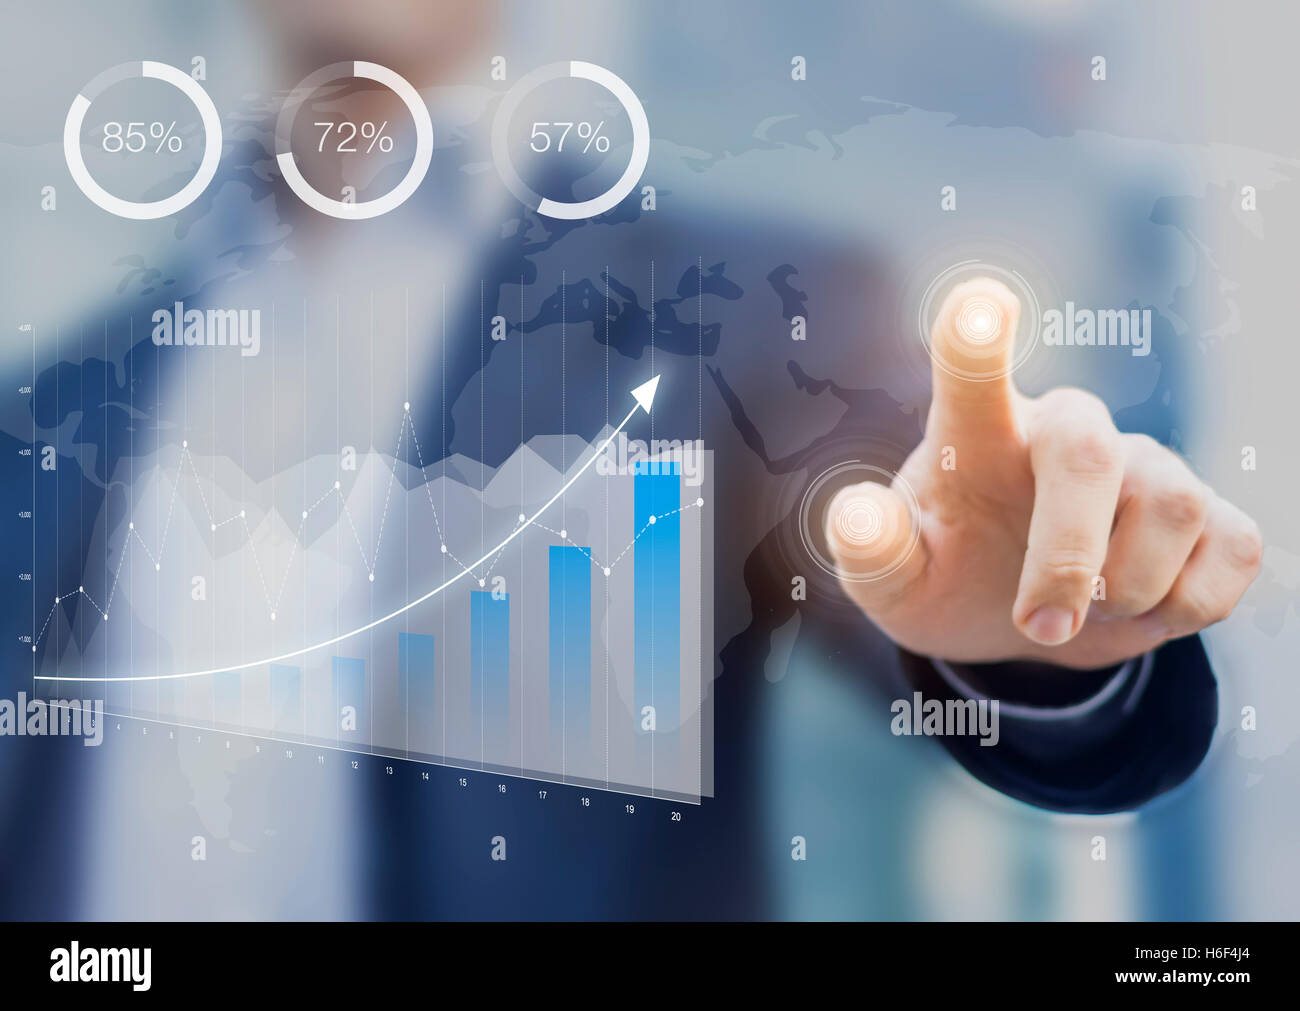 Business intelligence dashboard with key performance indicators on a computer interface, financial consultant touching screen Stock Photo